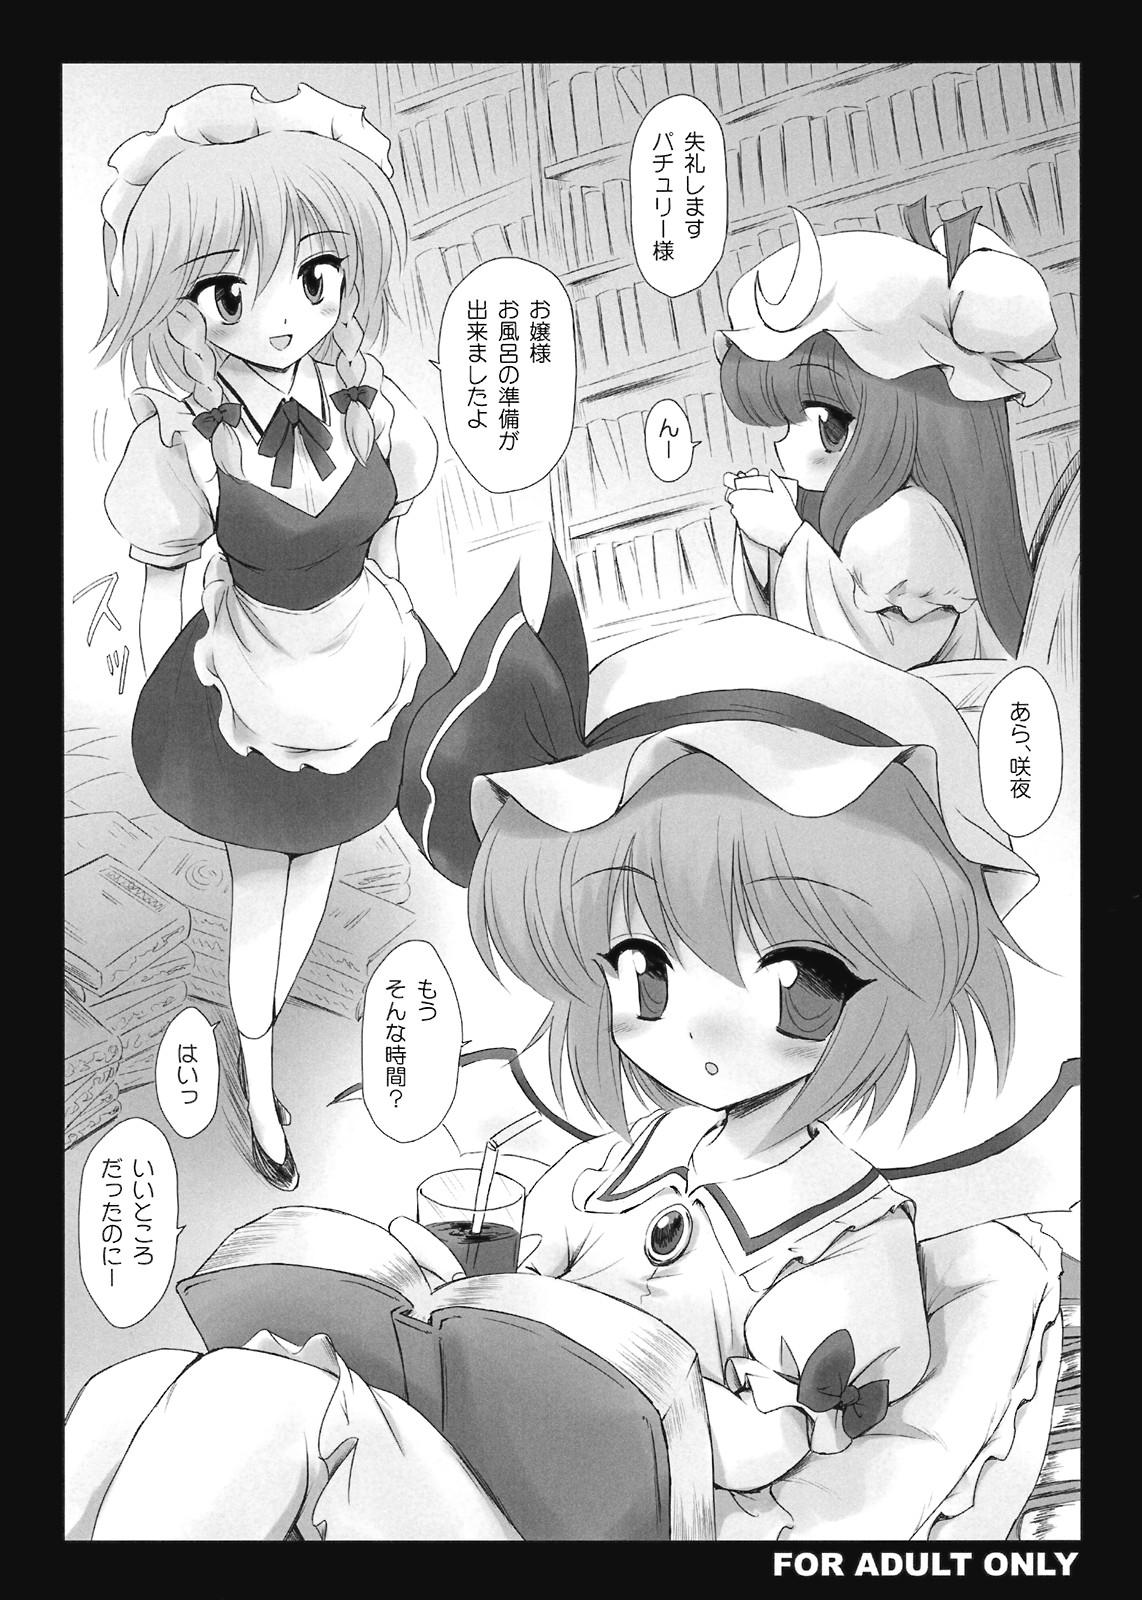 Letsdoeit コピー本 - Touhou project Porn Star - Page 1